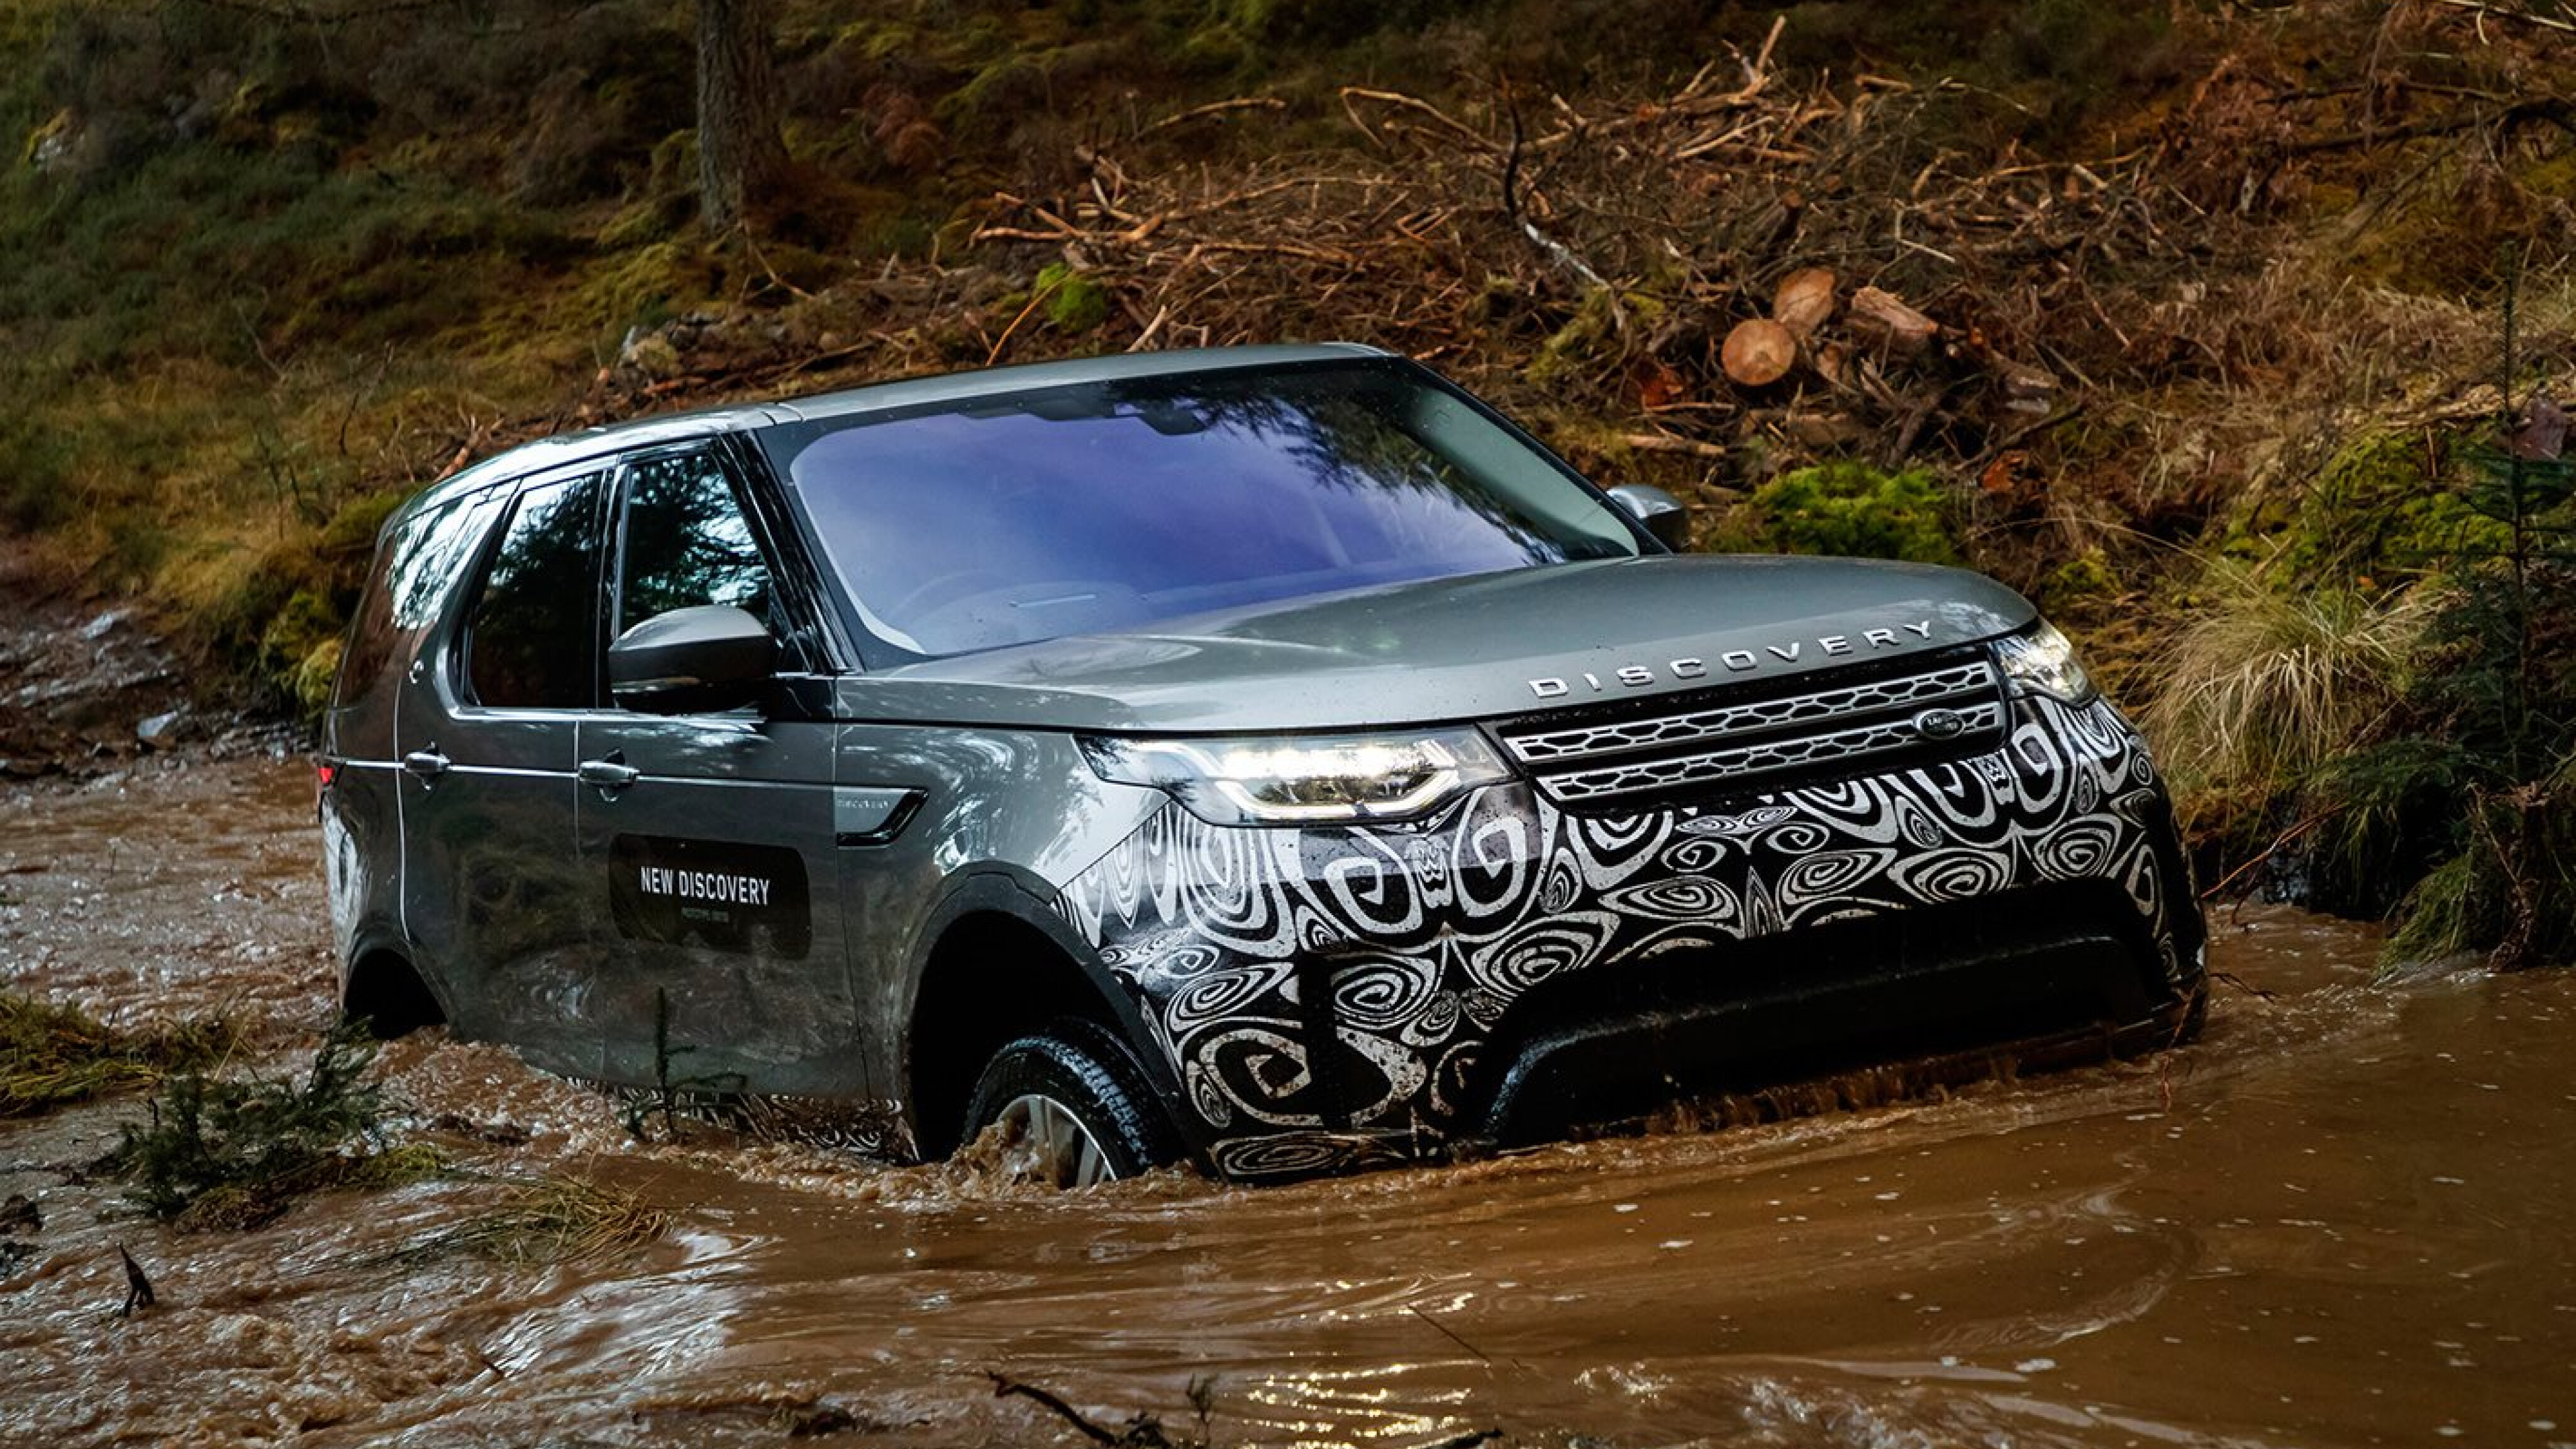 2017 Land Rover Discovery Prototype review